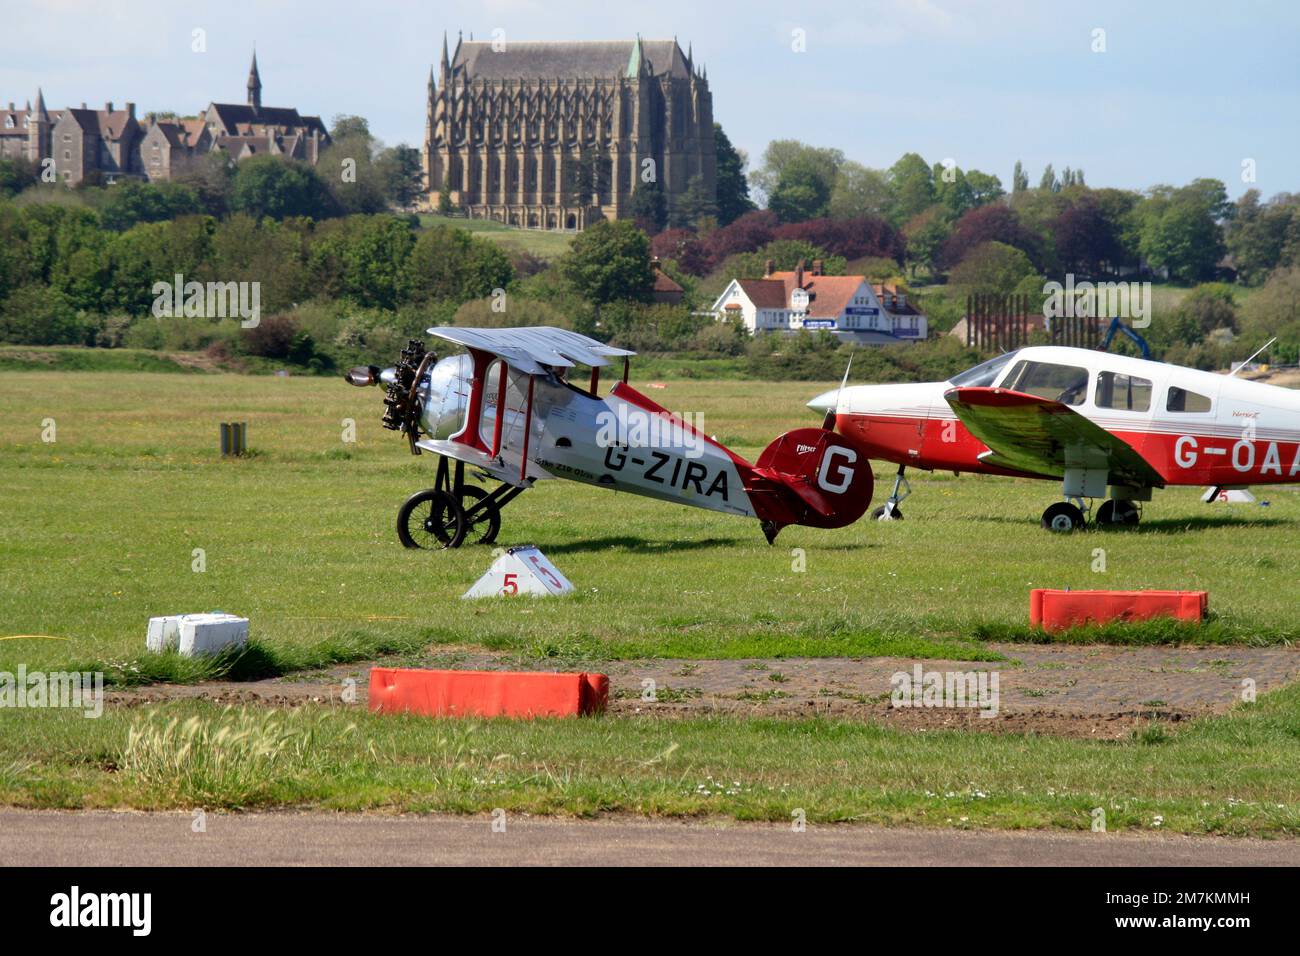 Staaken Z-21A aircraft with Lancing College to the rear Stock Photo